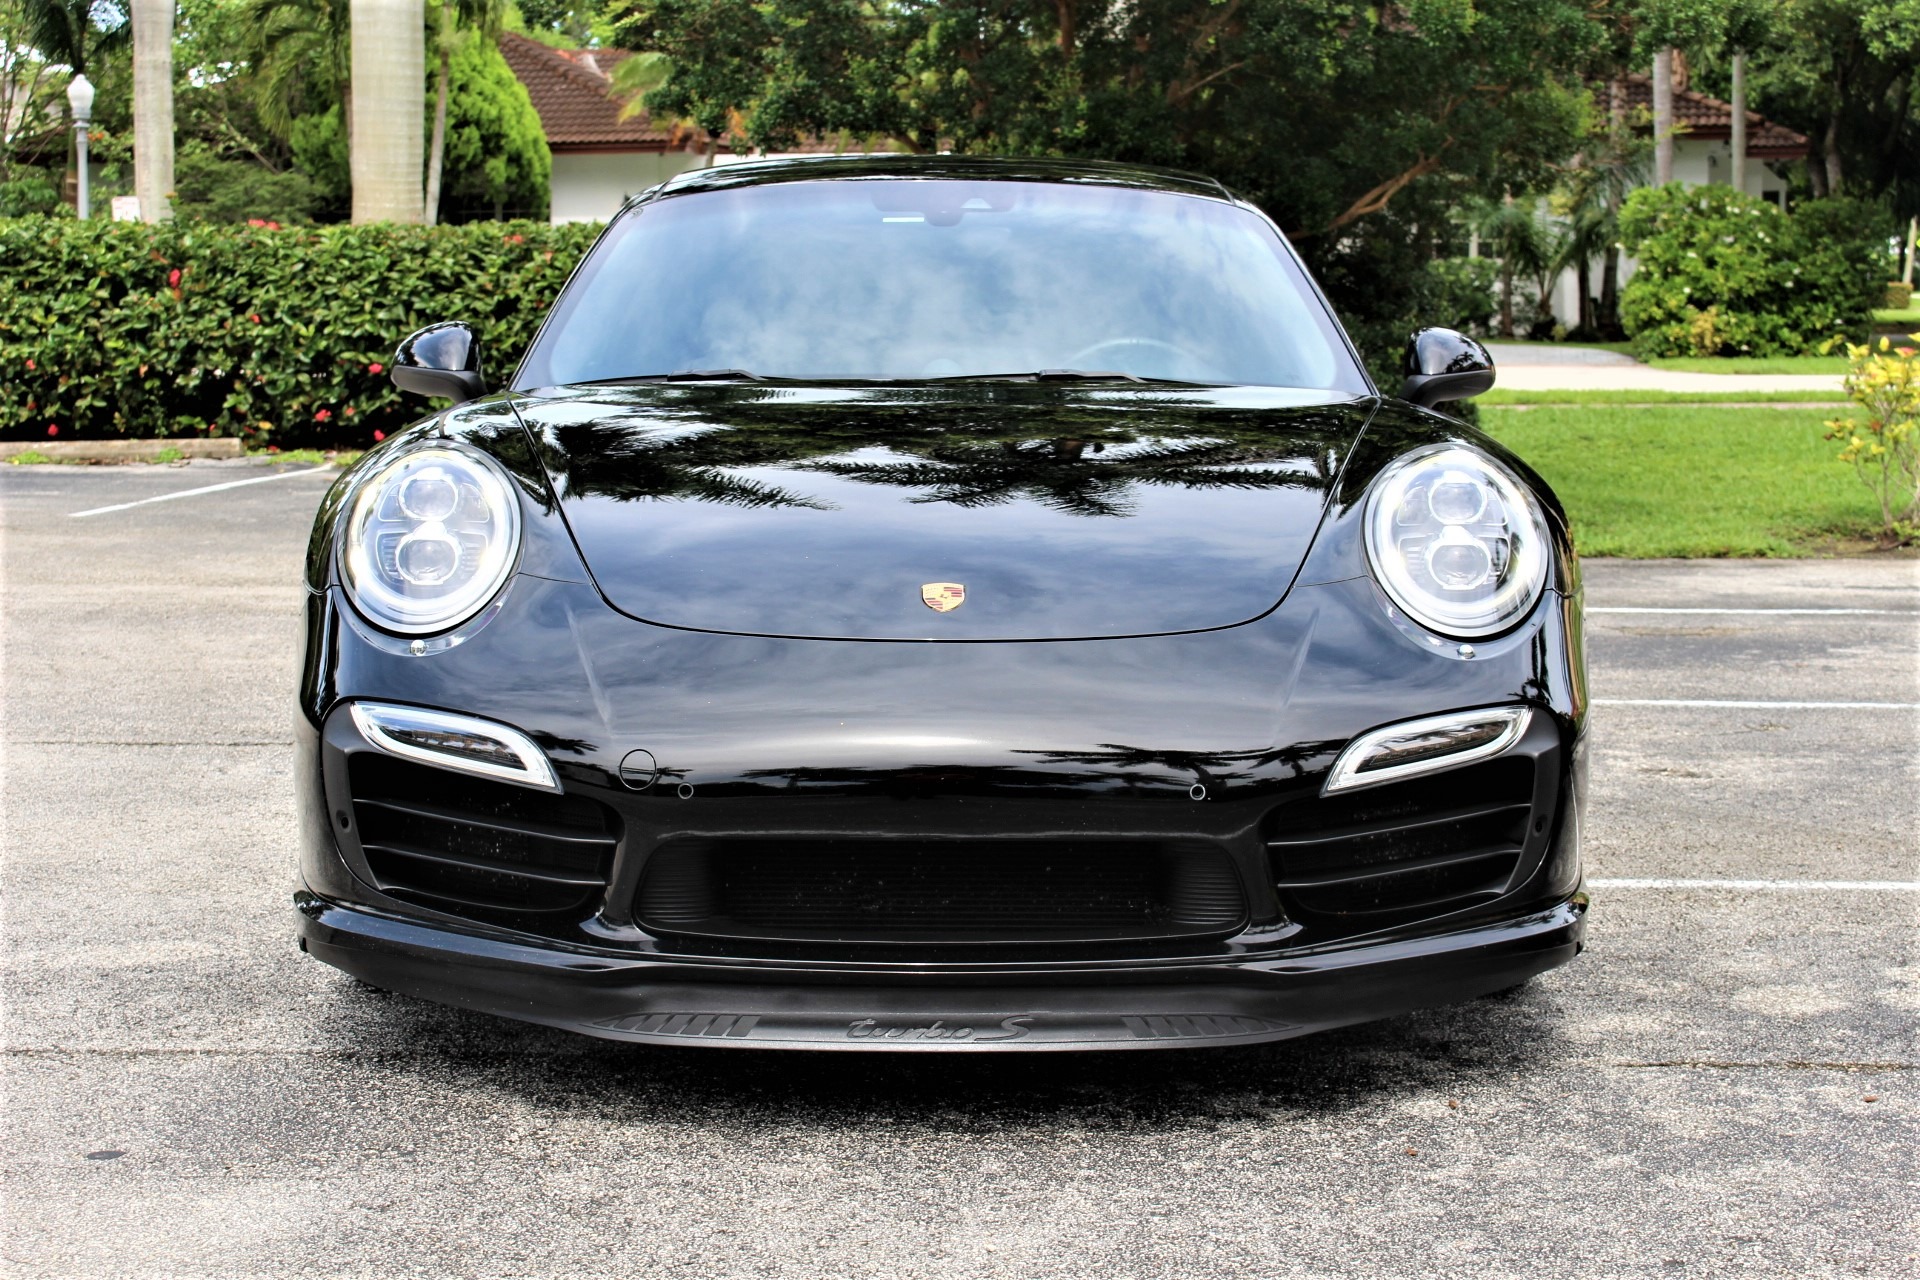 Used 2014 Porsche 911 Turbo S for sale Sold at The Gables Sports Cars in Miami FL 33146 2